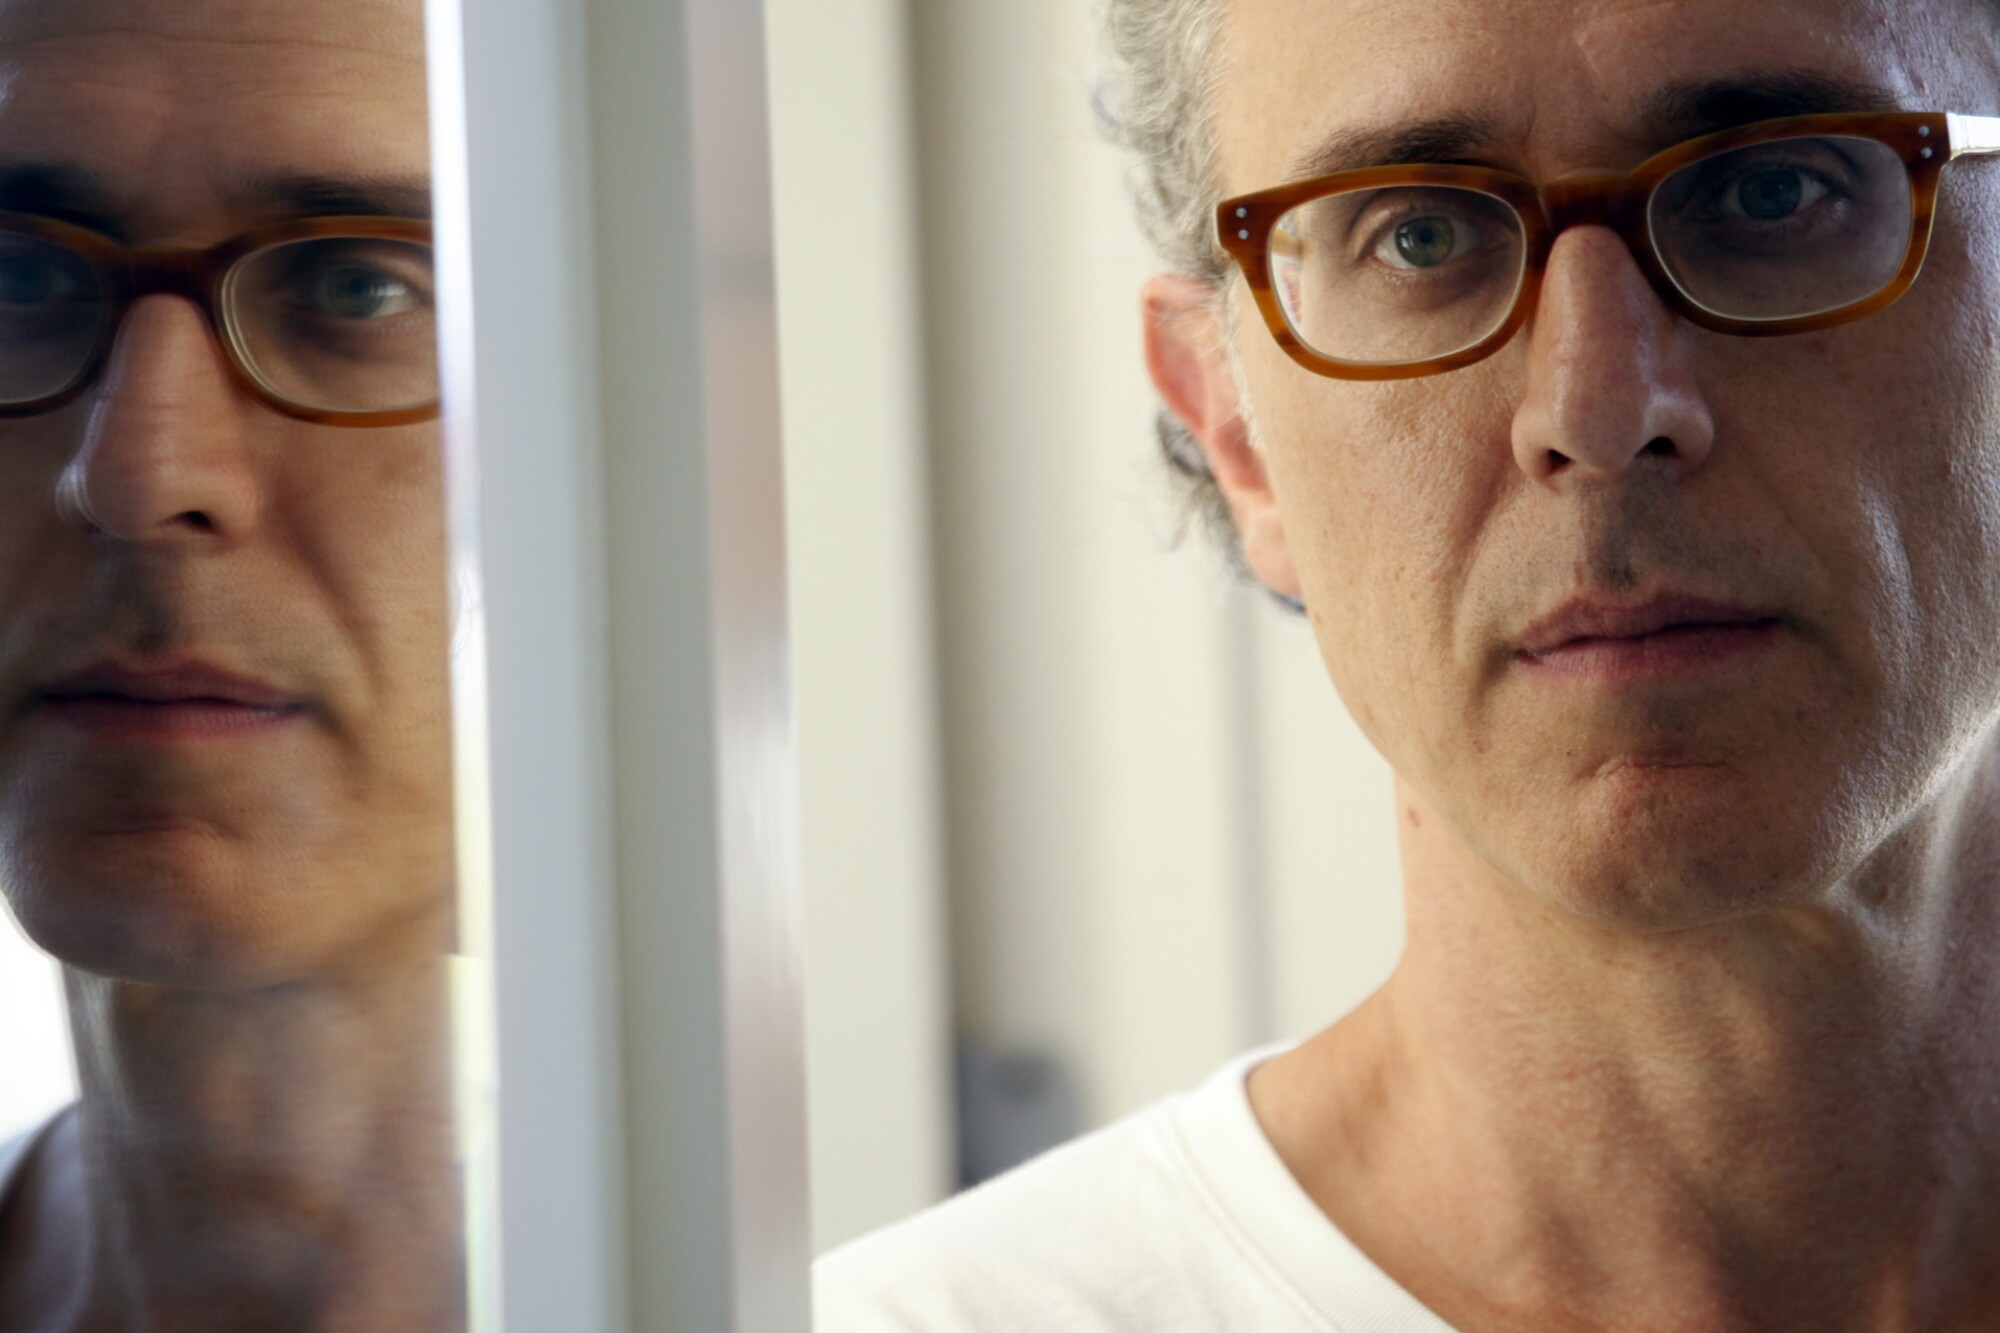 A man with orange-rimmed glasses and a white T-shirt stands next to a mirror